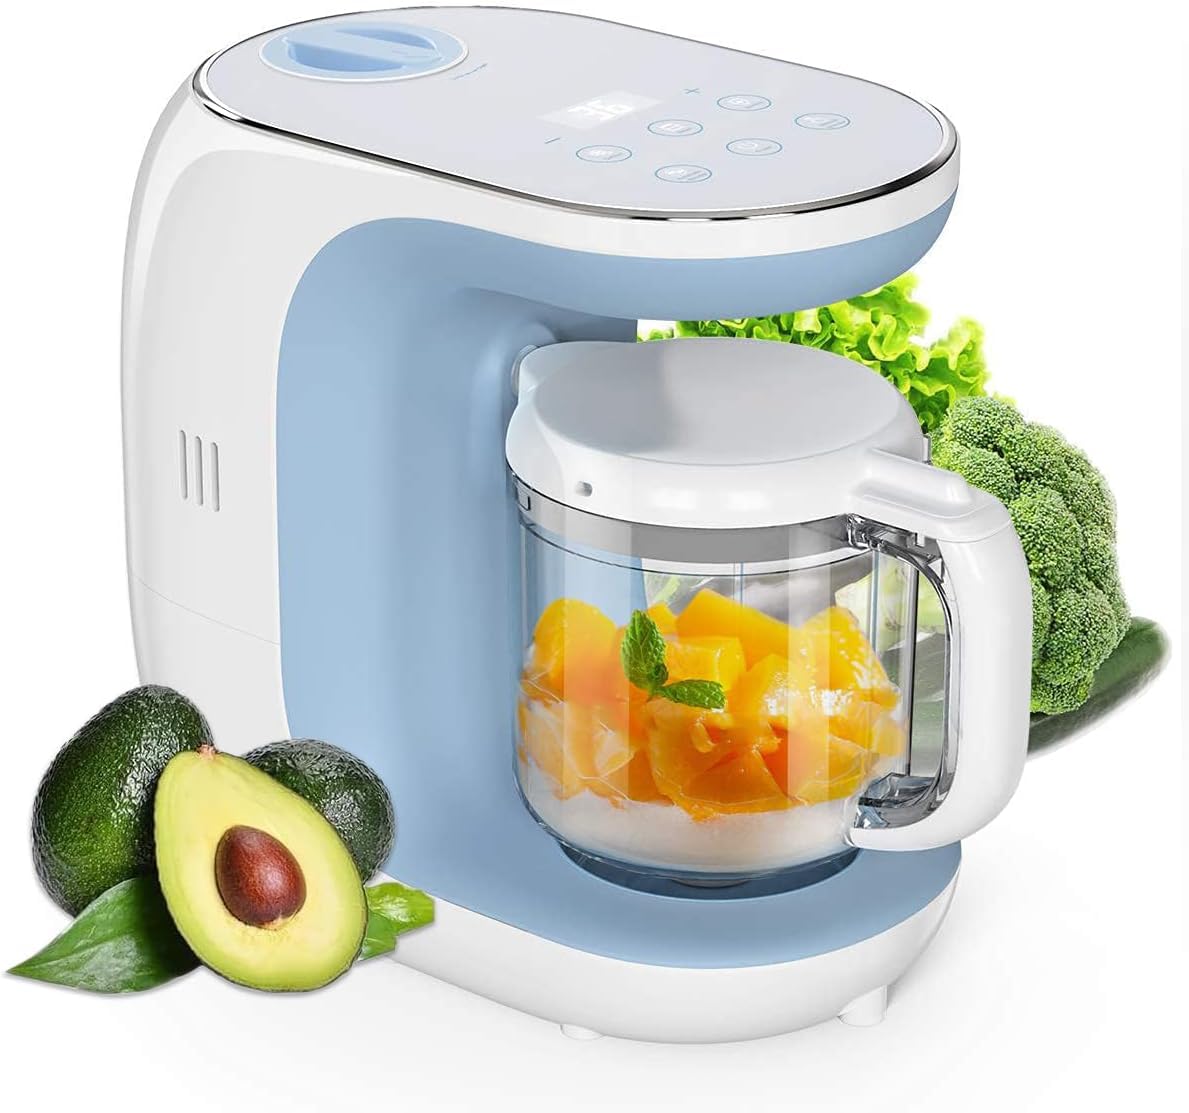 Baby Food Processor Maker Steamer and Blender, Multi-Functional Food Steamer Puree Grinder Machine, Auto Cooking & Shut-Off, Touch Control Panel, Defrost & Steaming Baby Food Mills